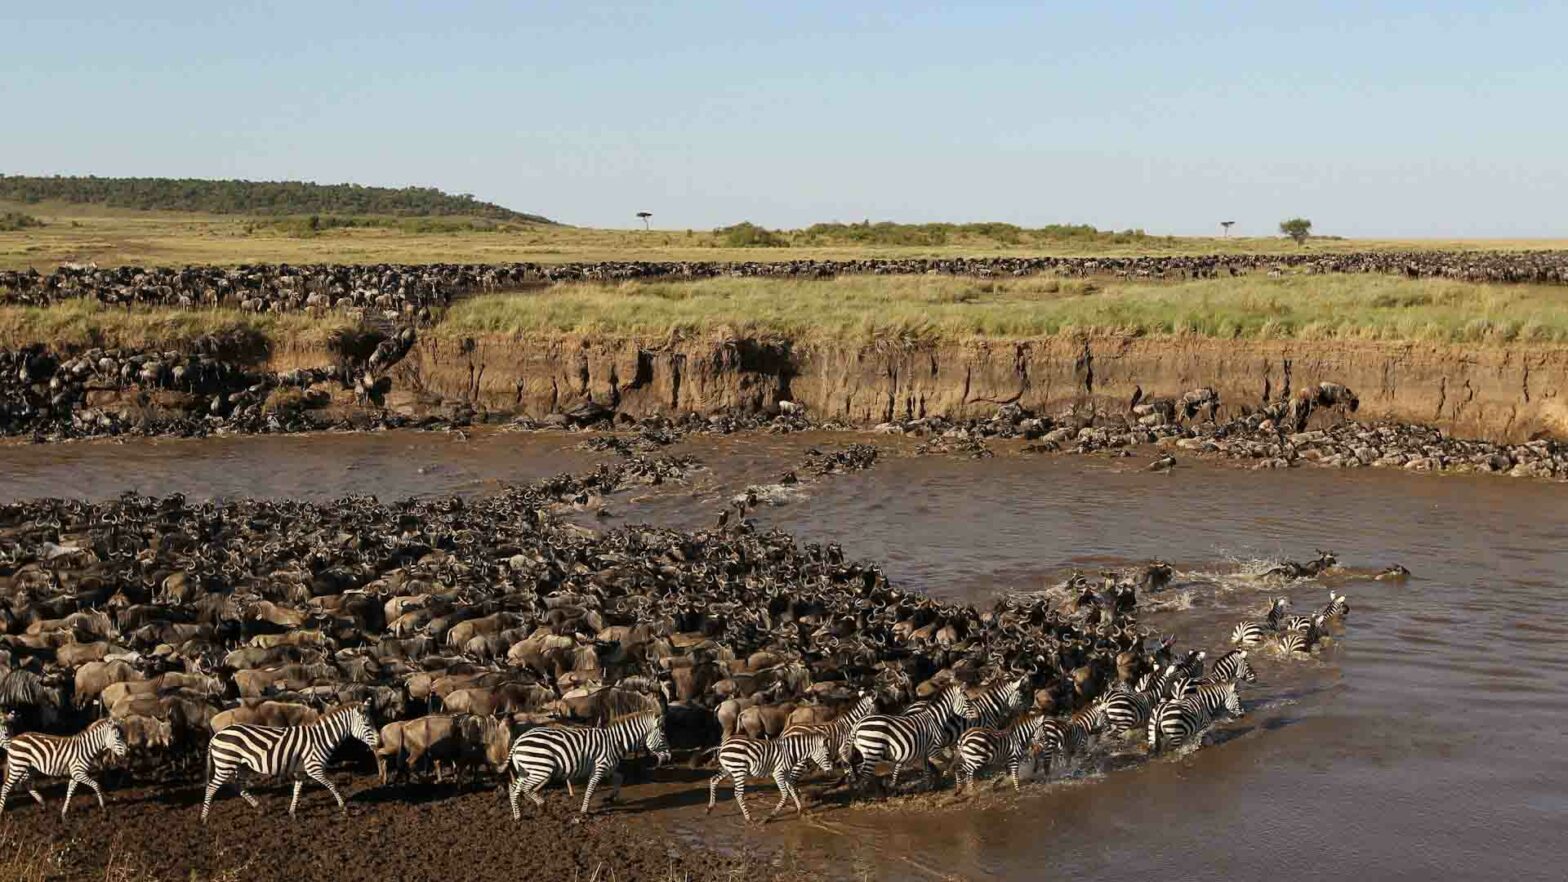 Travel from Dar es Salaam to Serengeti to see the Wildebeest migration